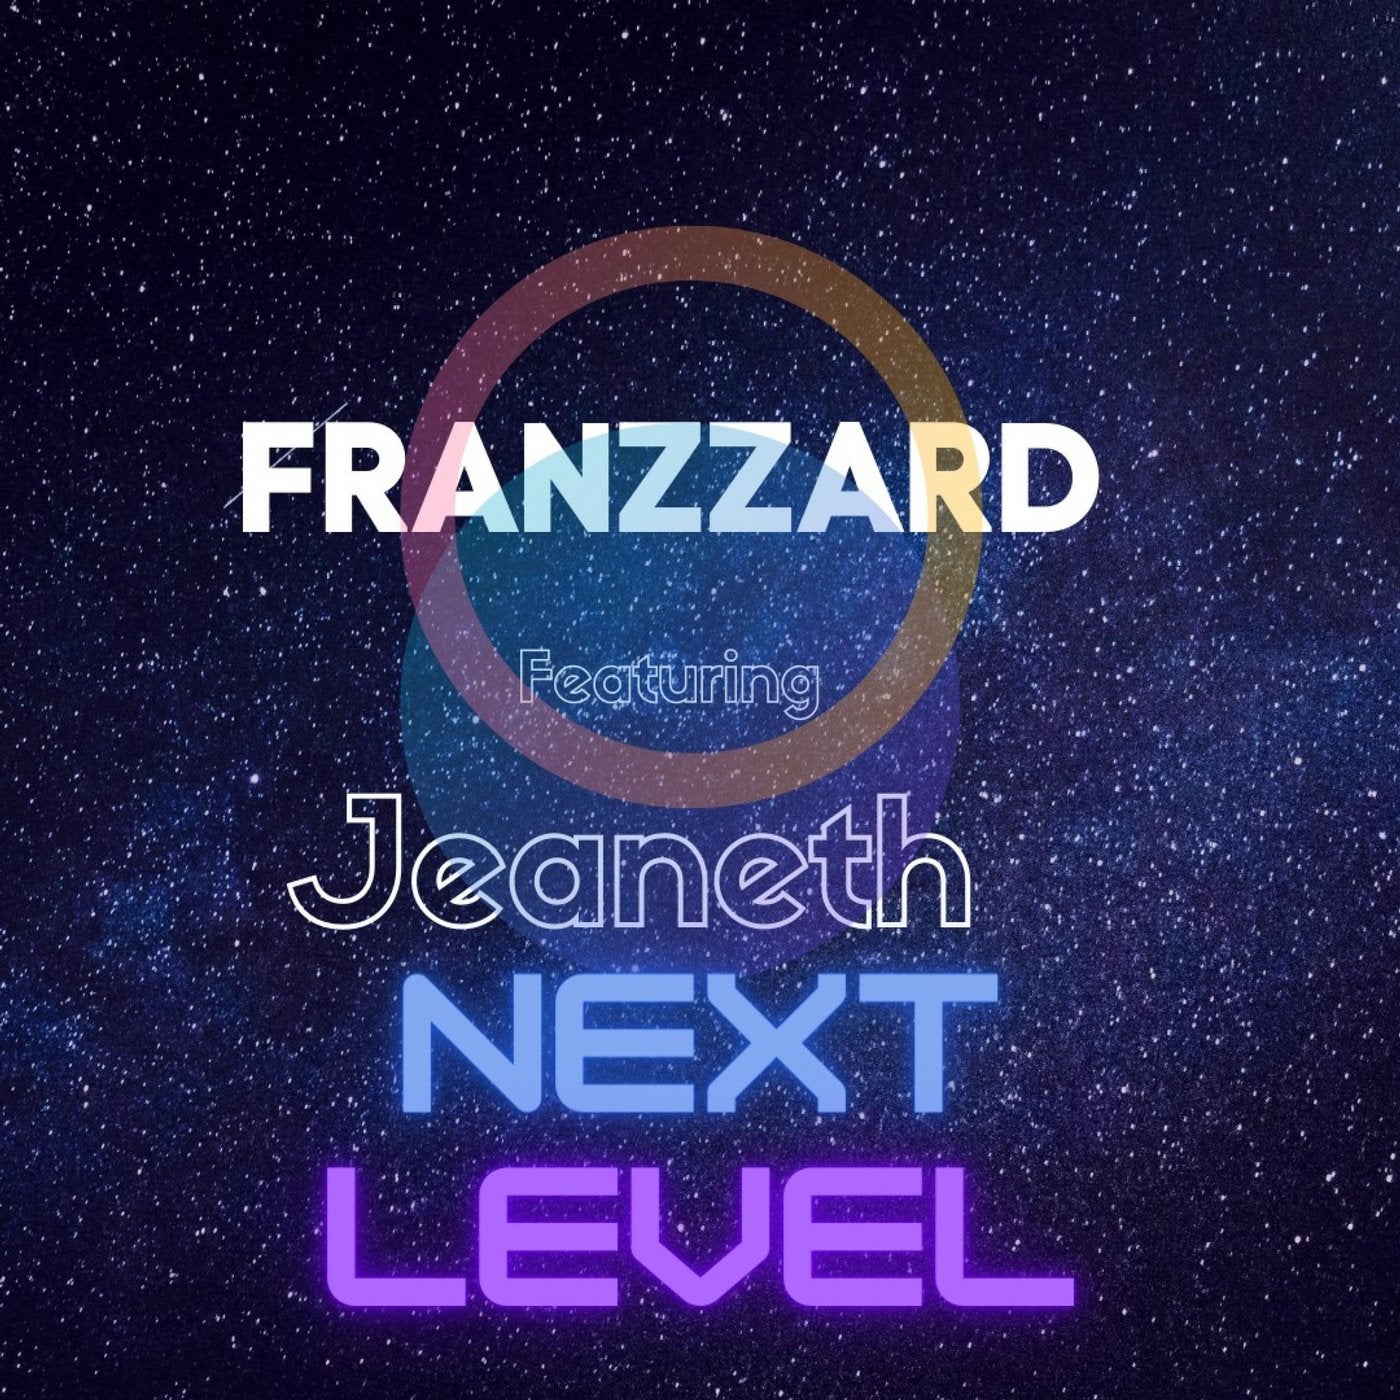 Next Level (feat. Jeaneth)